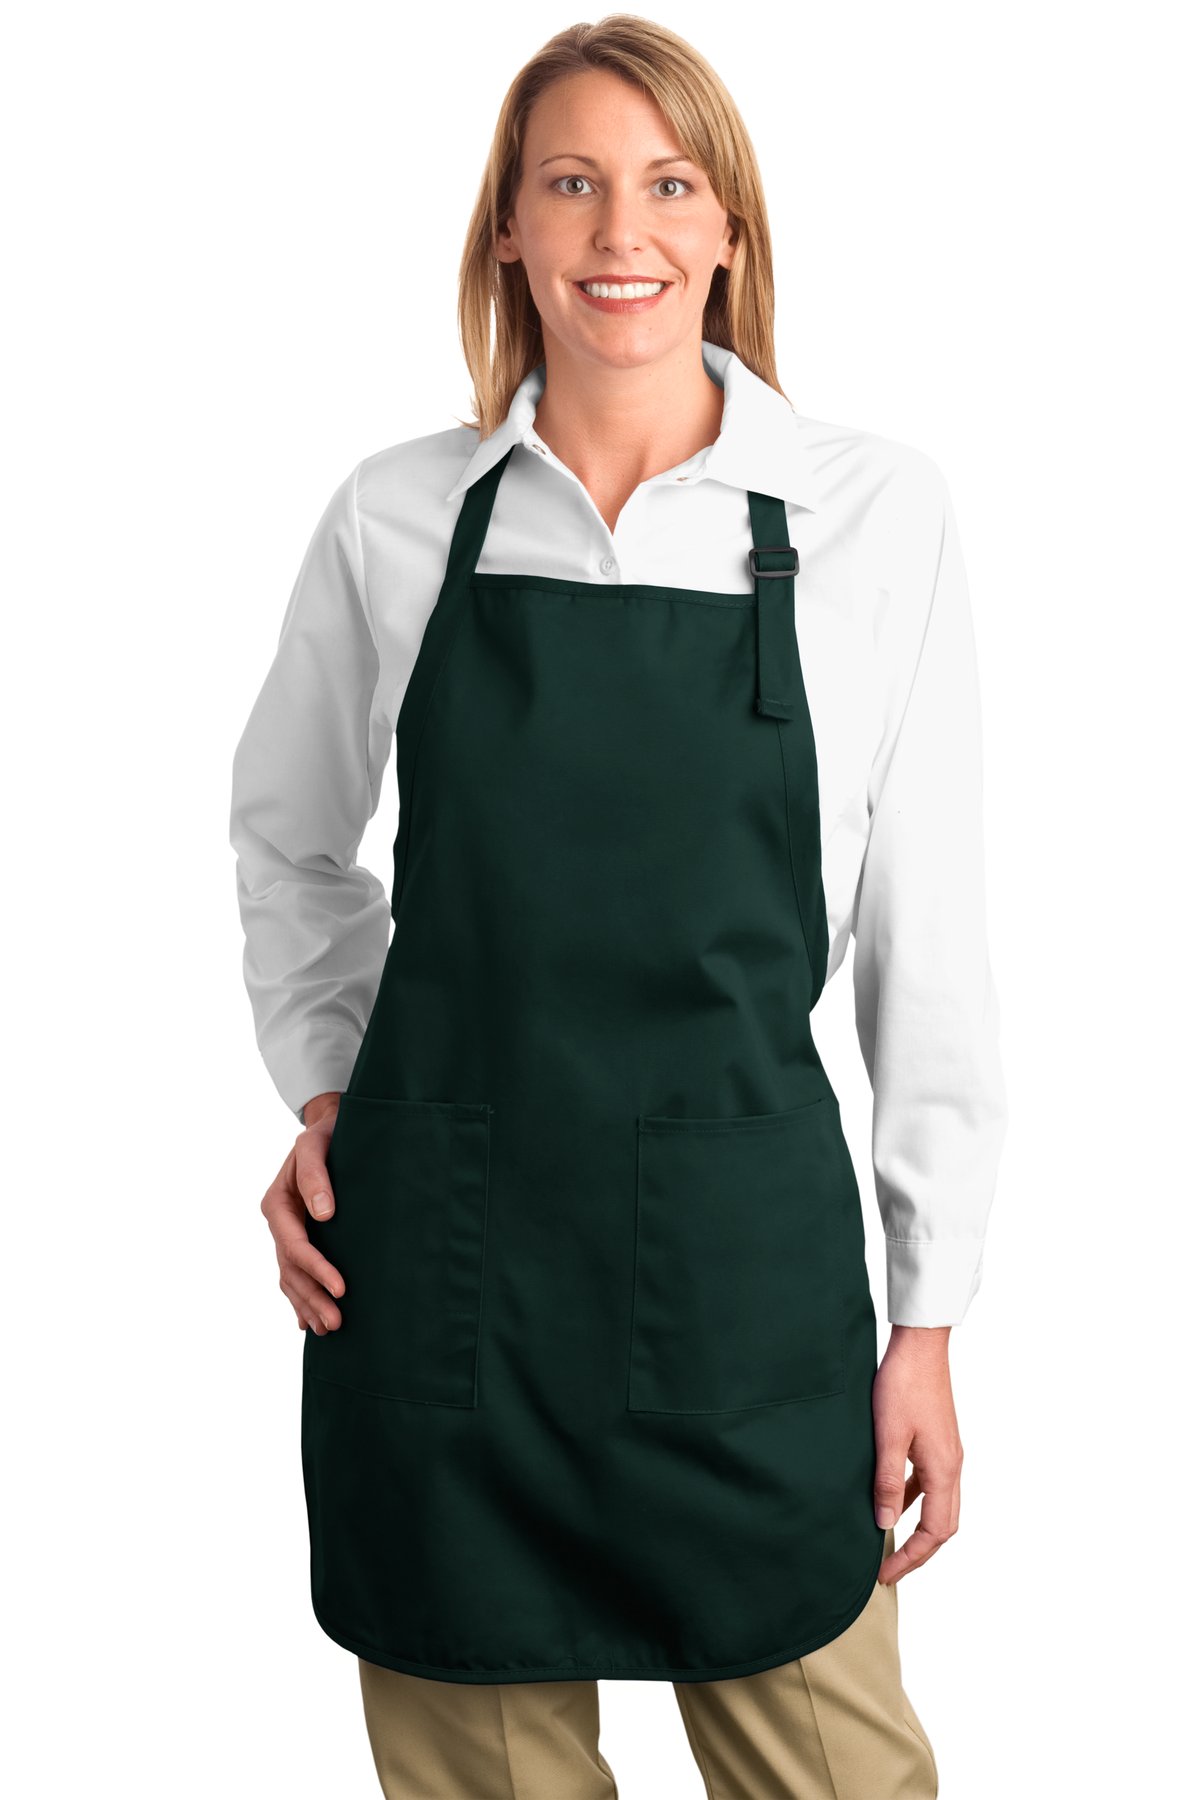 Port Authority - Full Length Apron with Pockets. A500